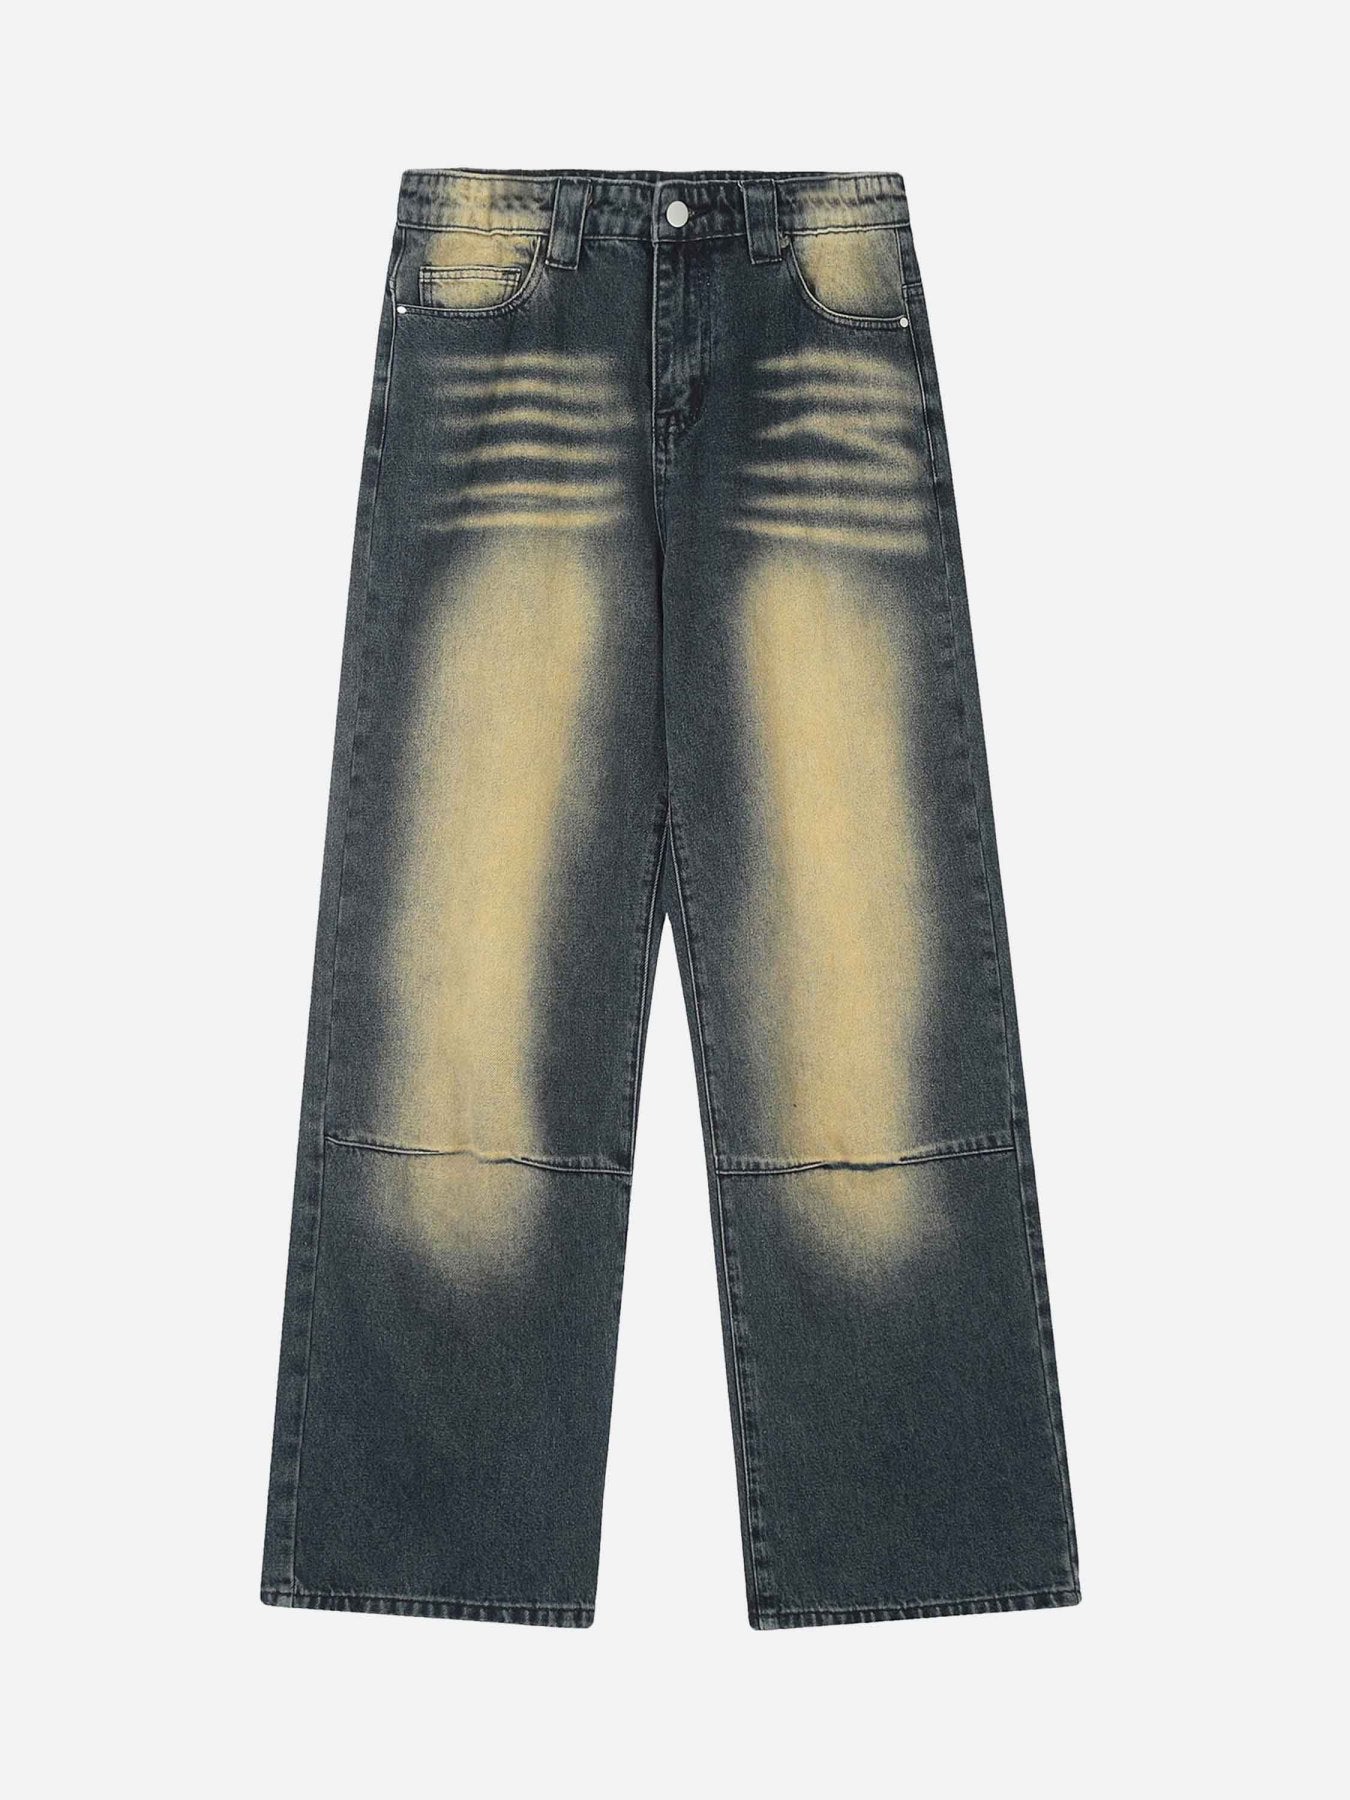 Thesupermade American Gothic Letter Embroidered Jeans